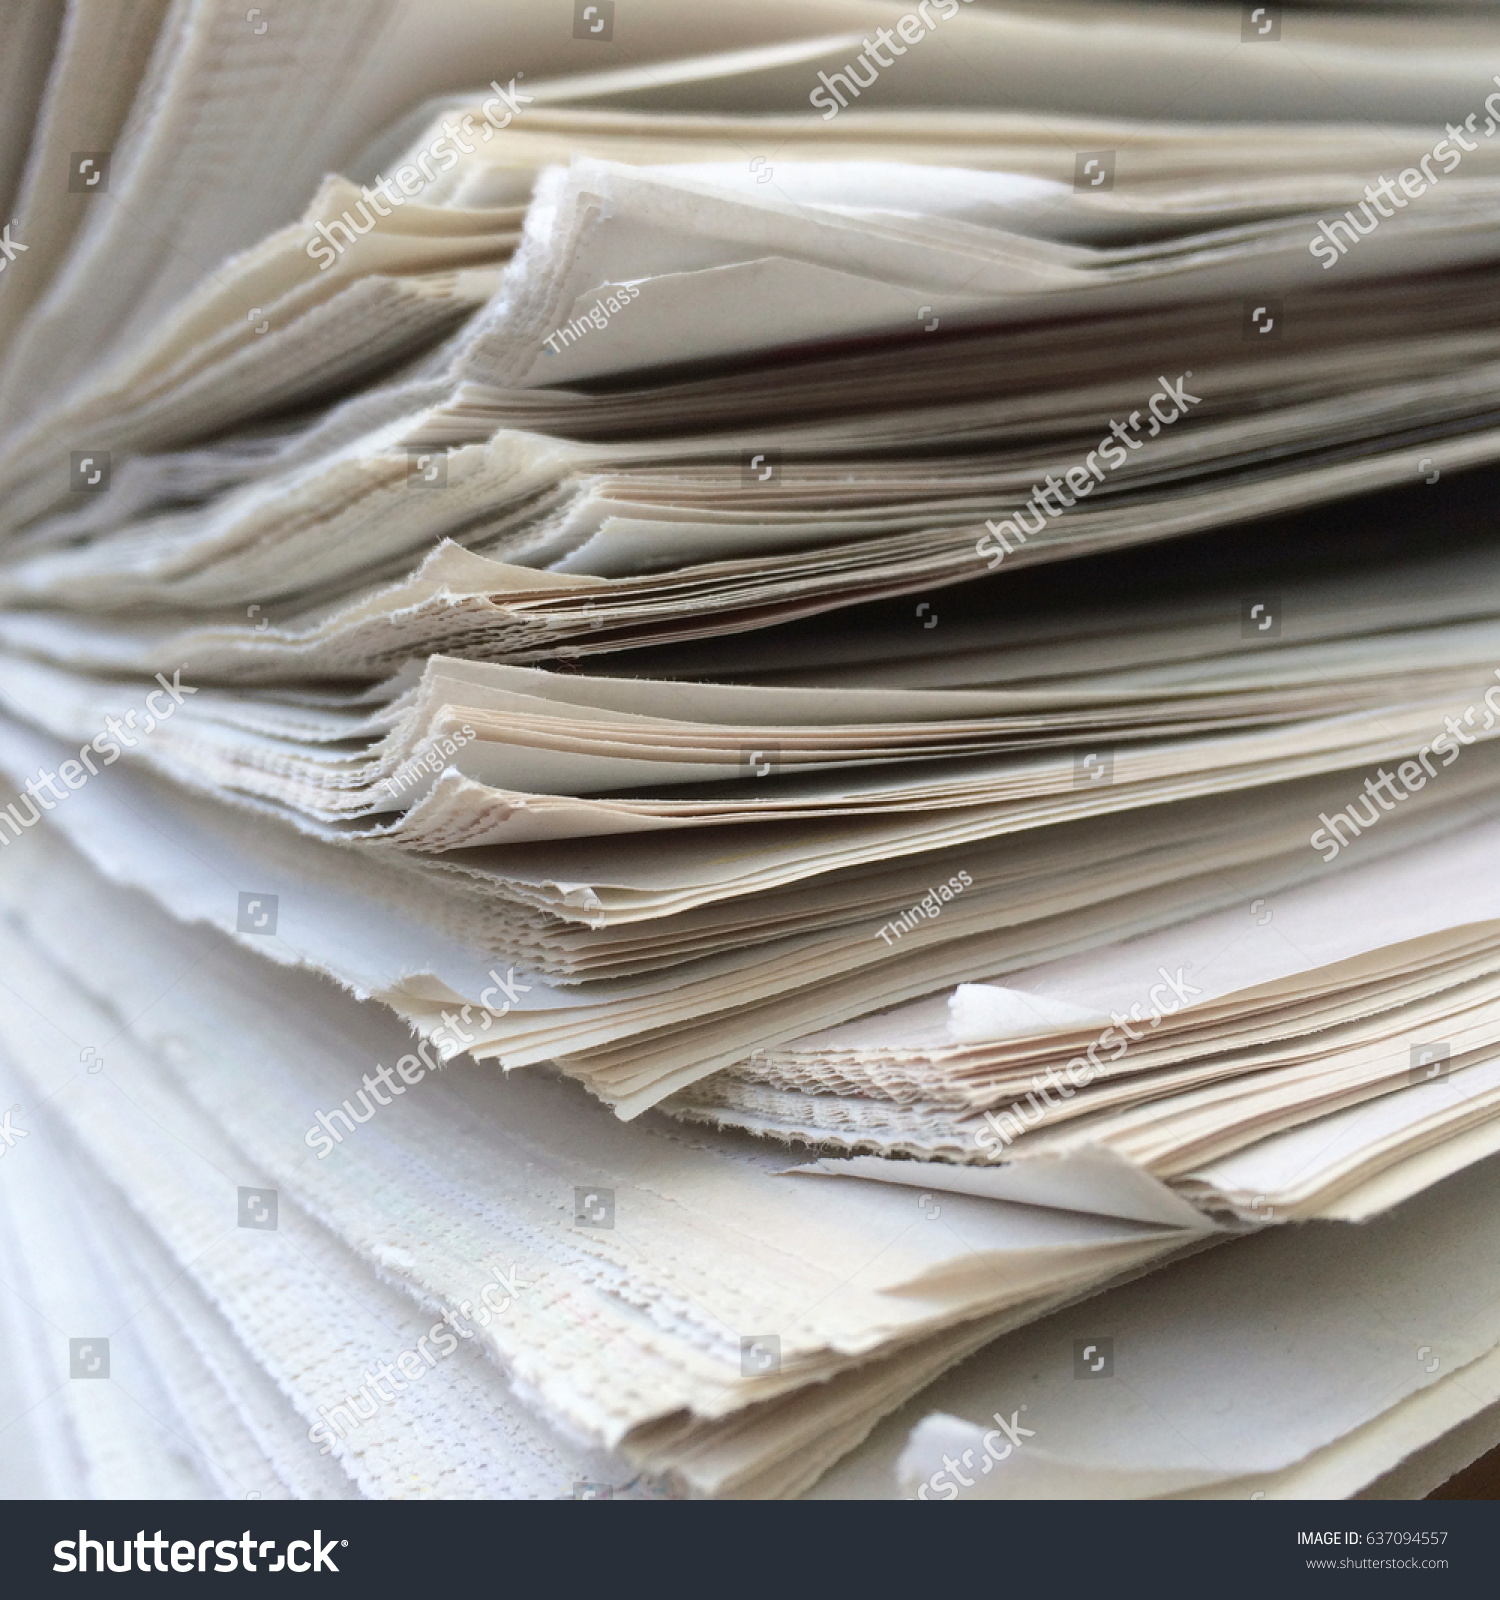 Close Edges Stack Newspapers Stock Photo 637094557 - Shutterstock